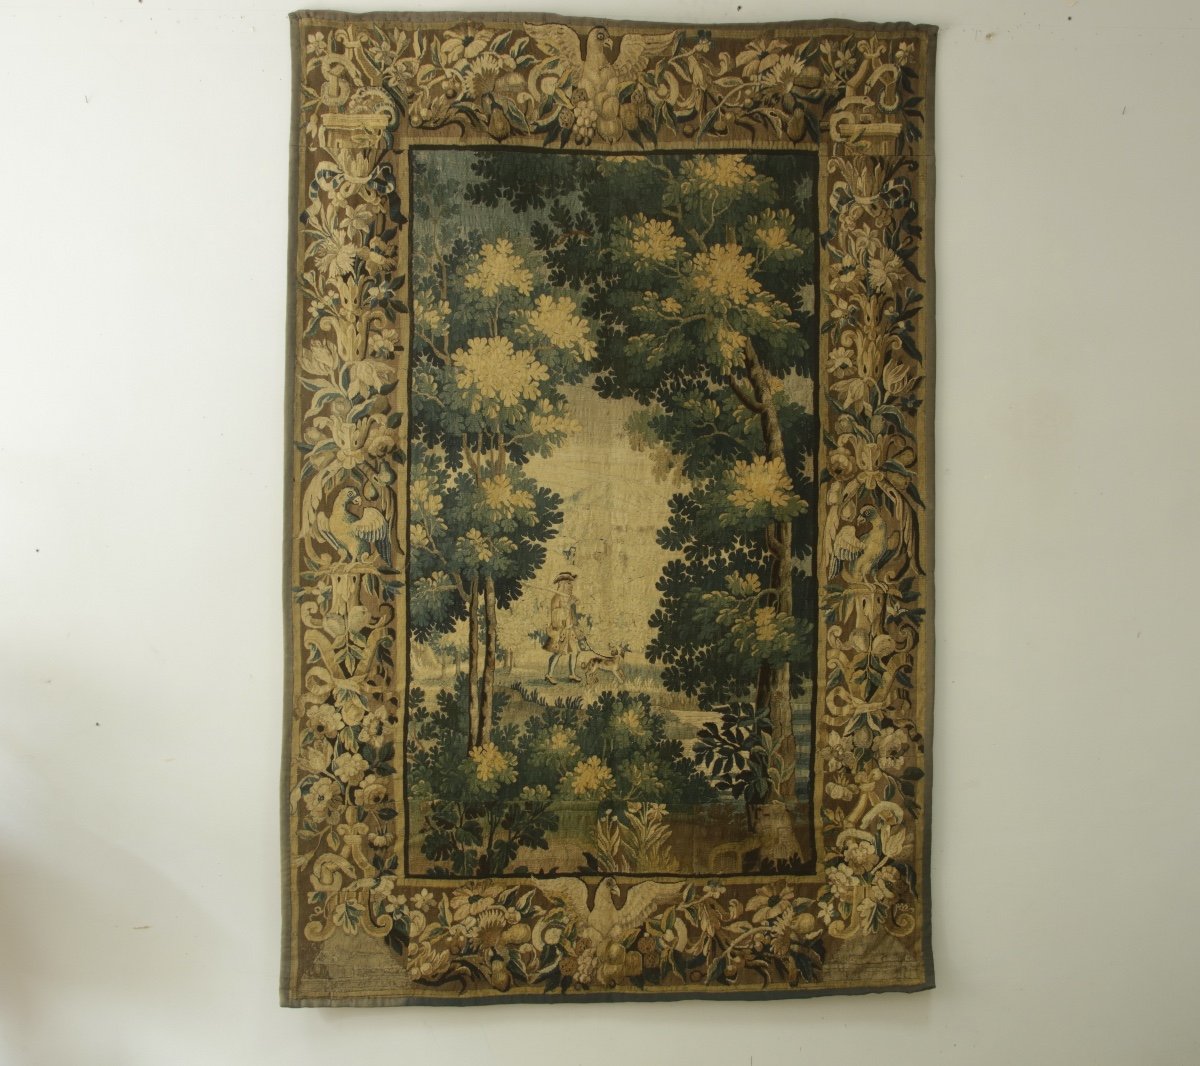 Aubusson Tapestry, Early 18th Century.